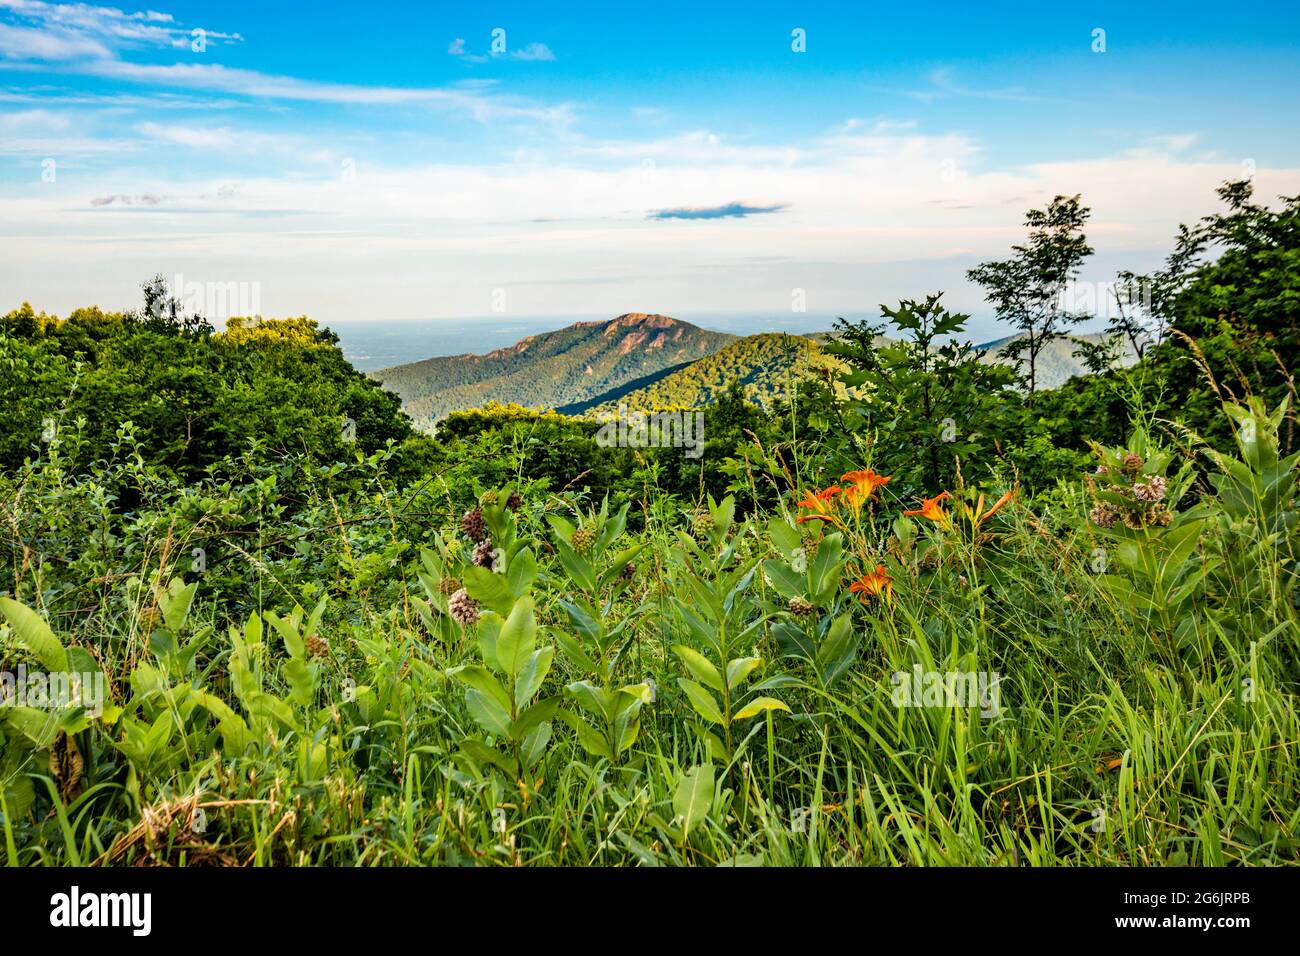 Scenic overlook of Shenandoah blue ridge mountains and hills with flowers at the front during sunset Stock Photo